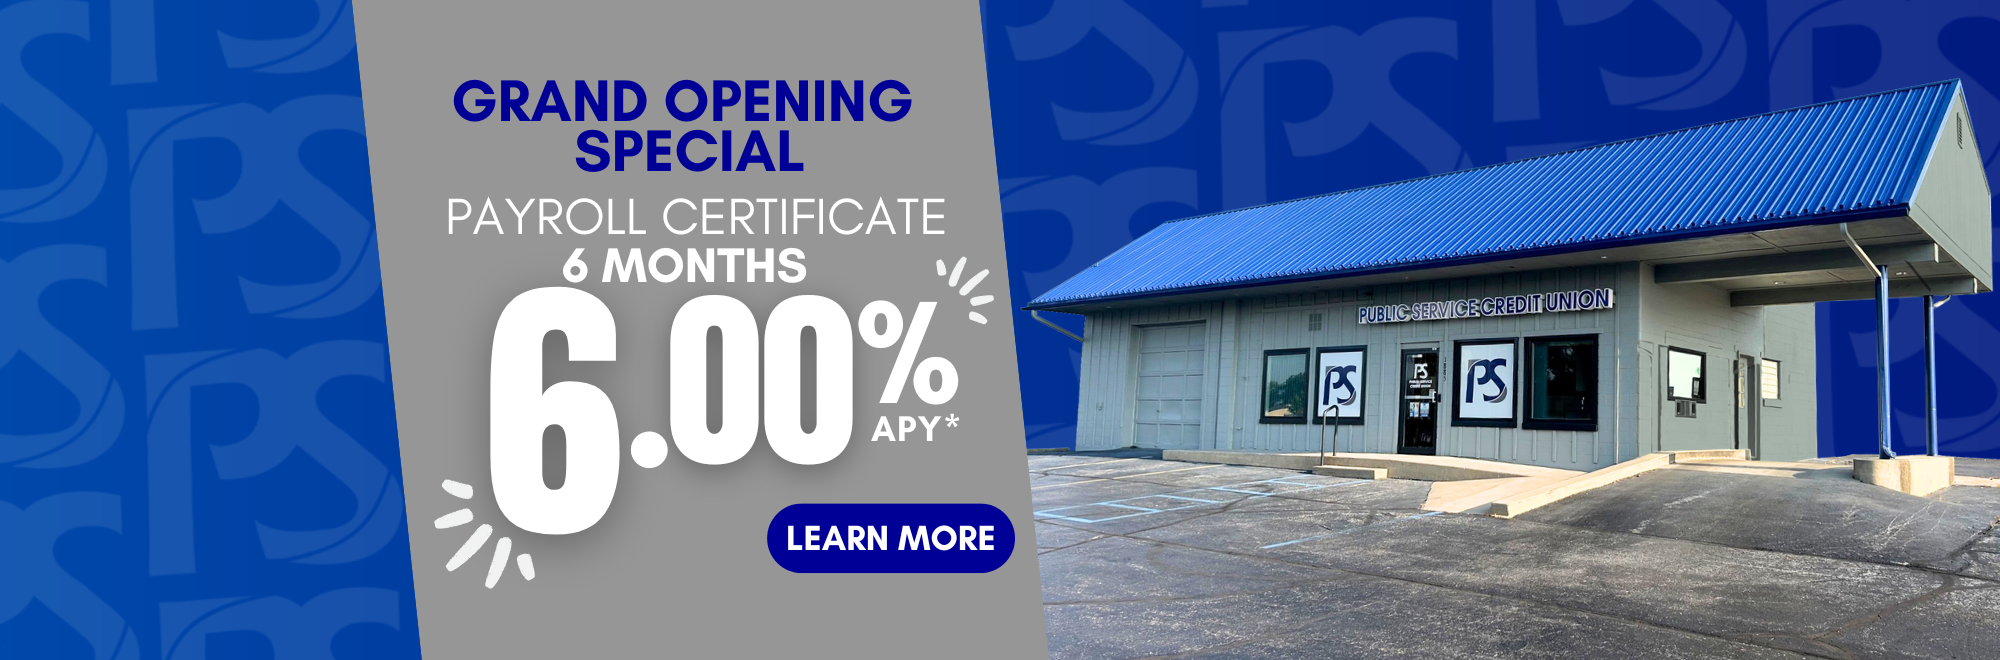 Grand Opening Special Payroll Certificate 6 months 6.00%APY* Click to learn more